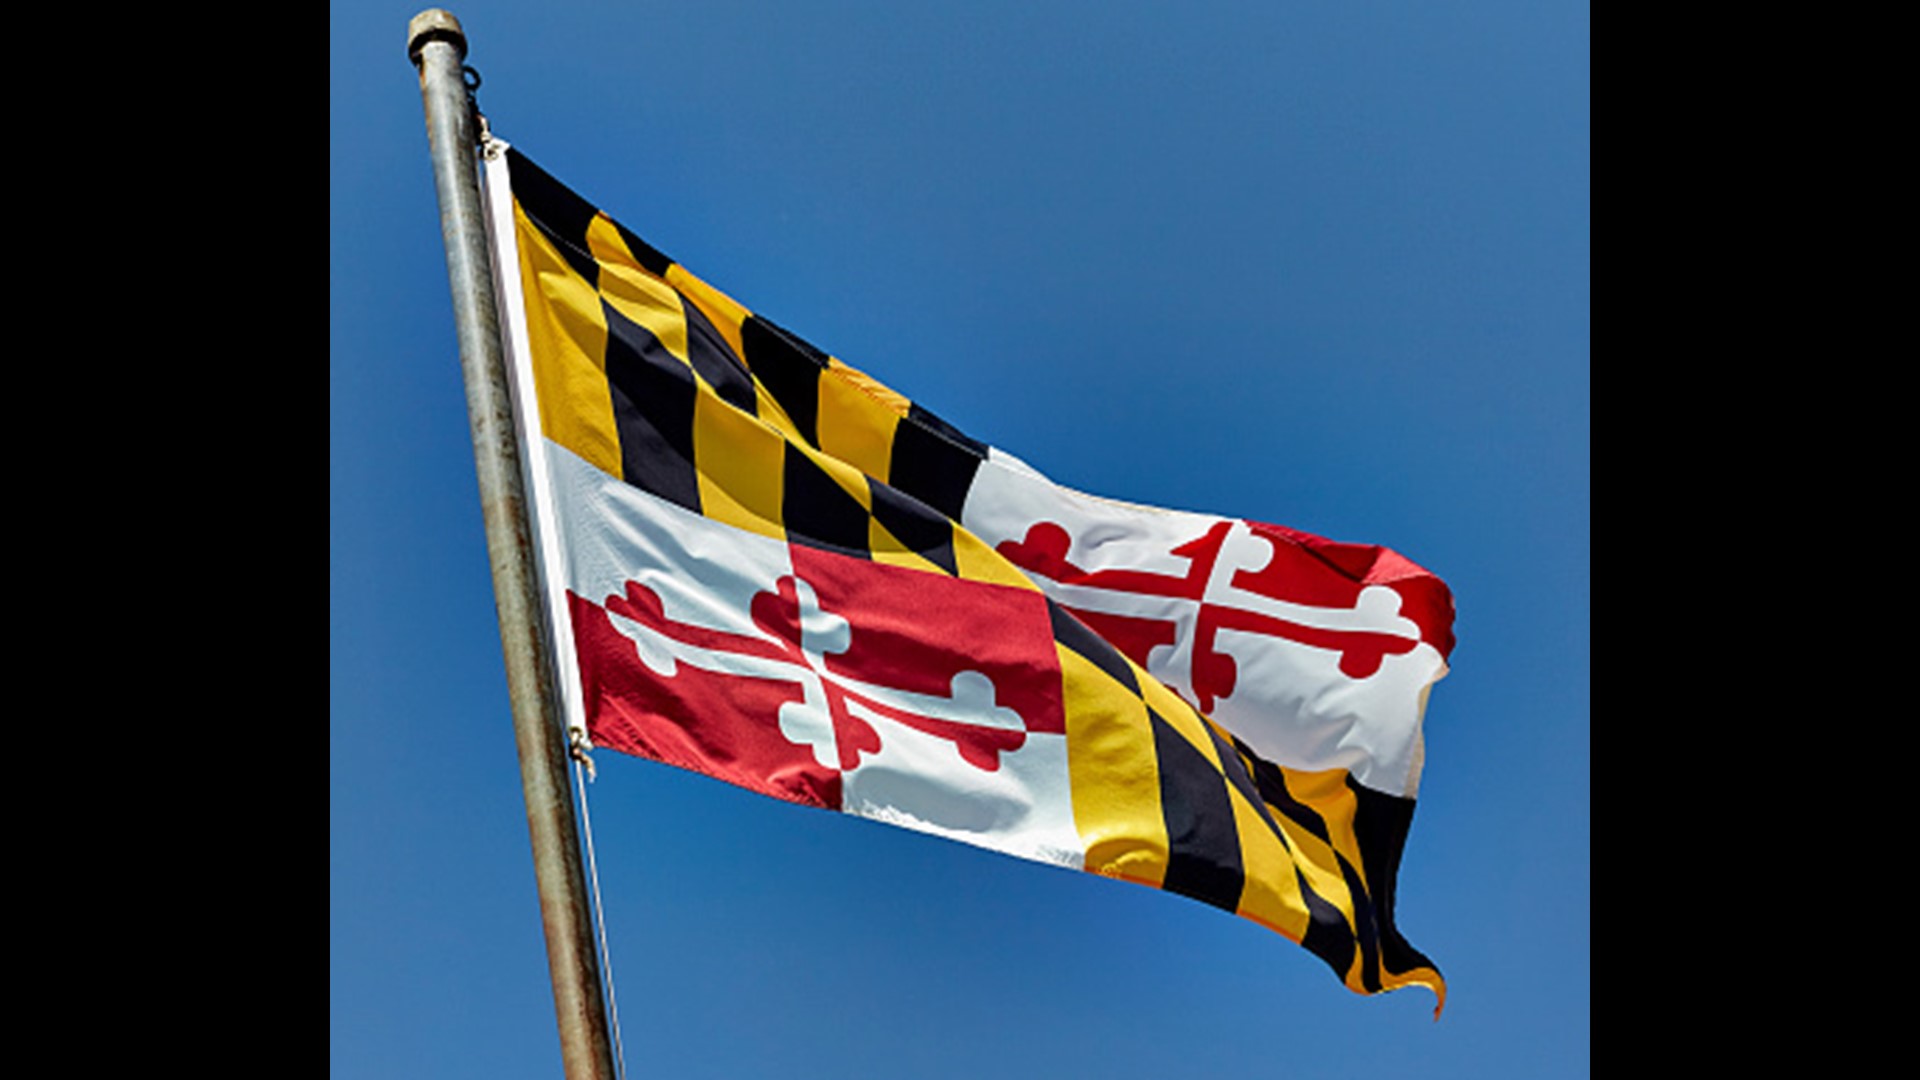 10 new Maryland laws you should know